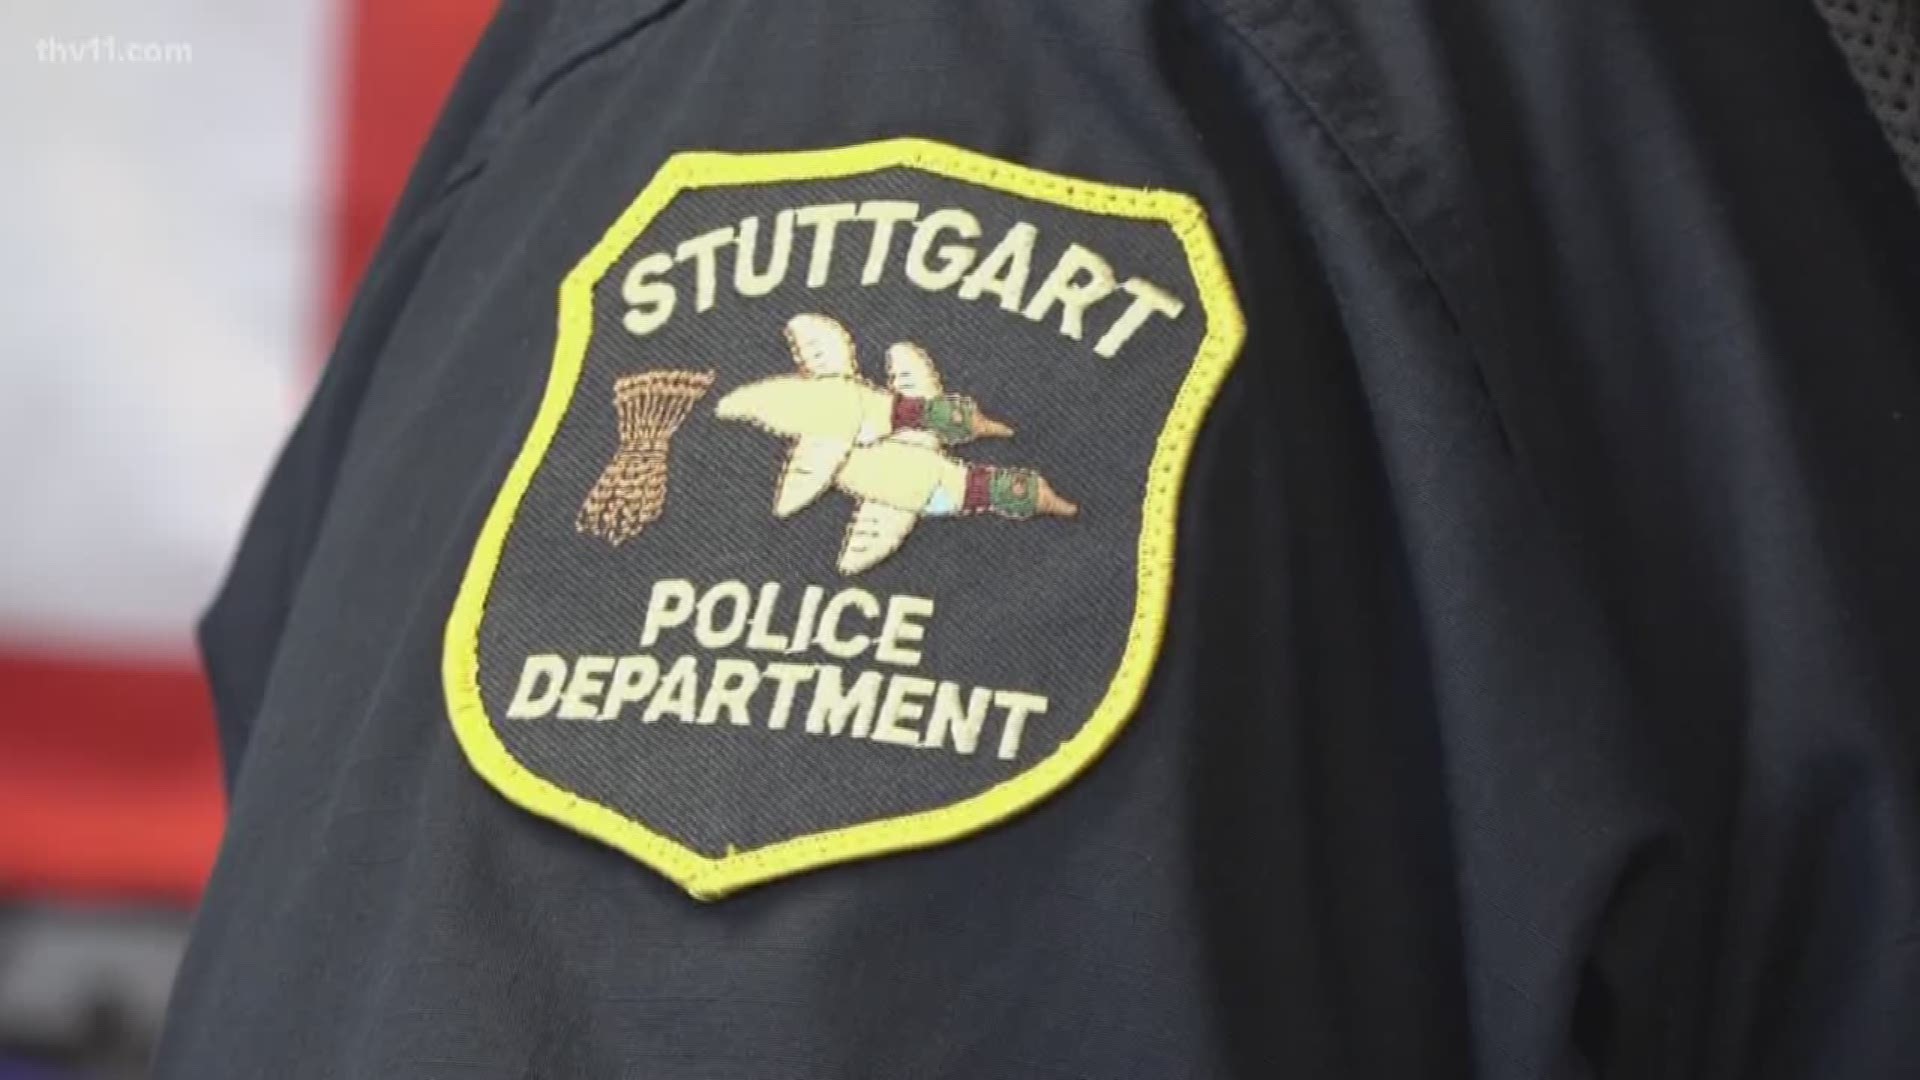 The Stuttgart Police Department is working to get new uniforms, but struggling to find the money to cover the expense.